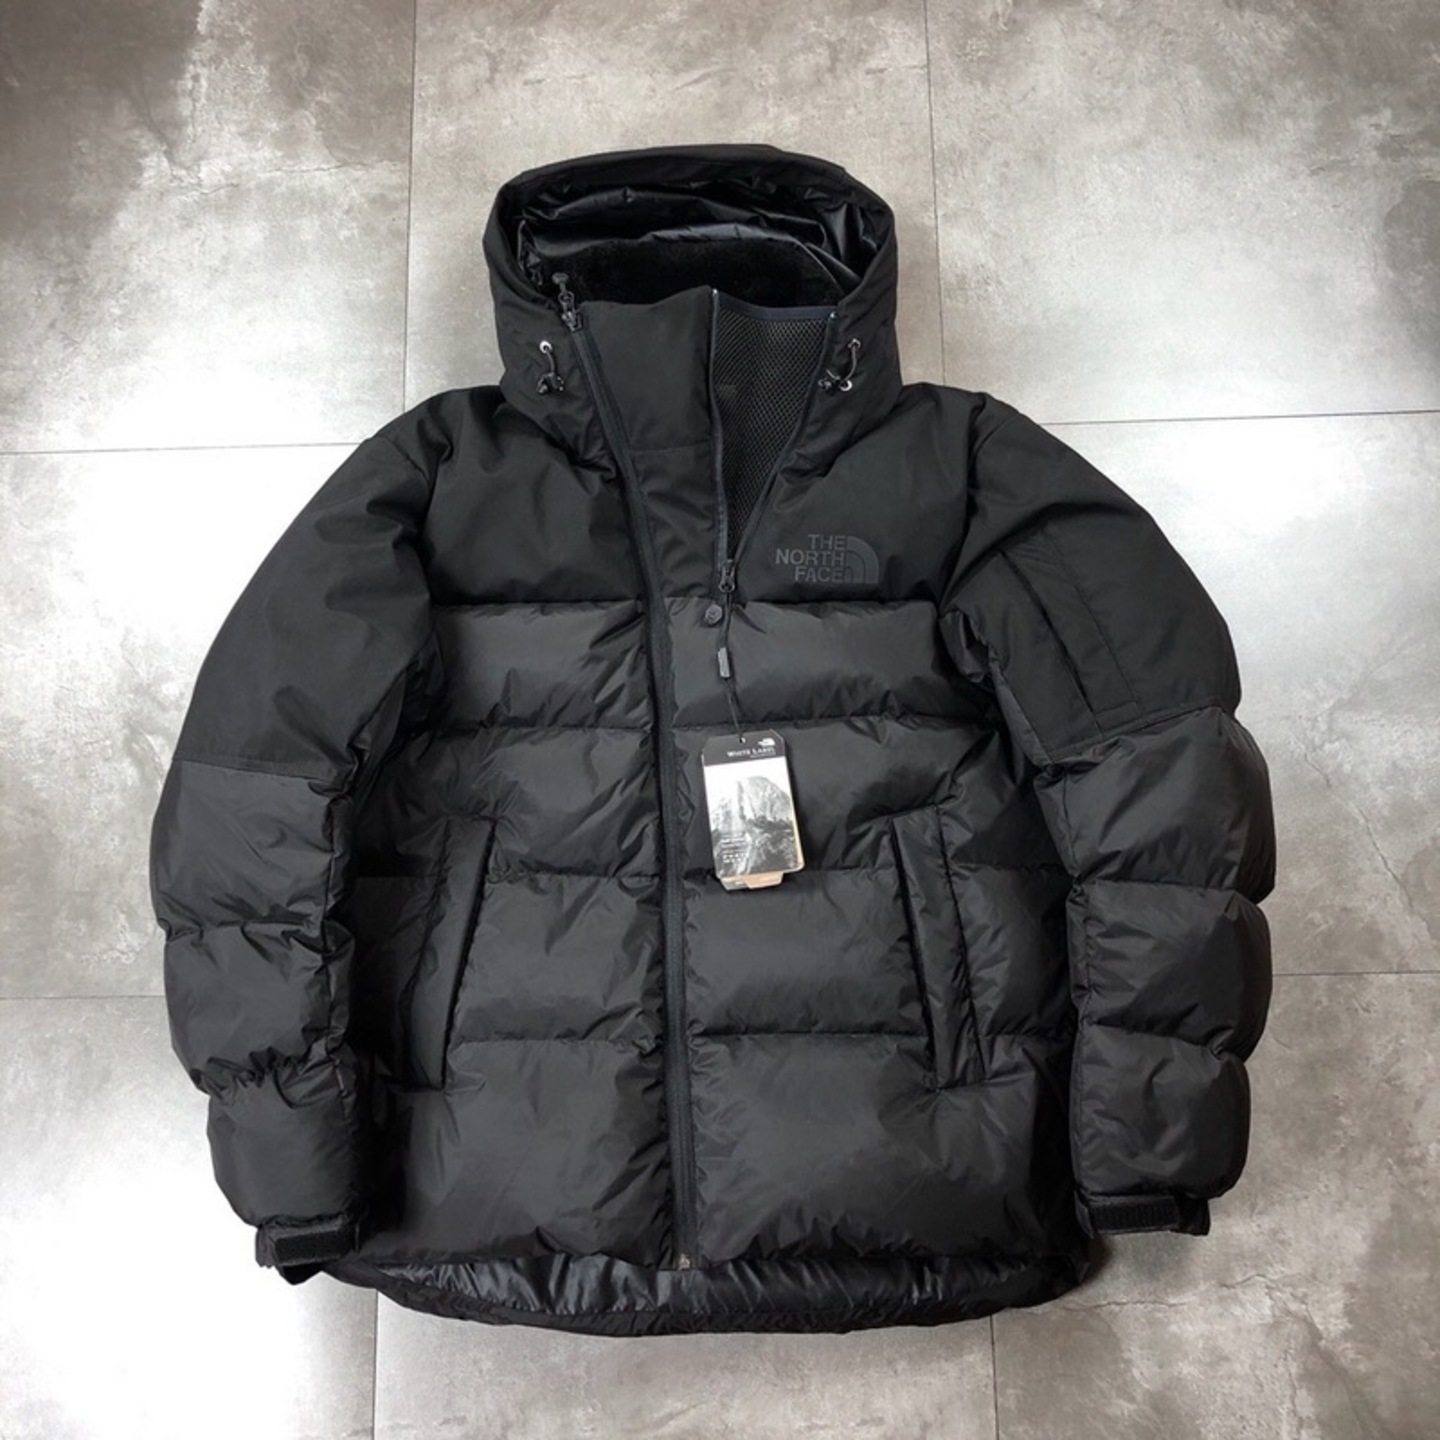 The North Face White Label Down Jacket